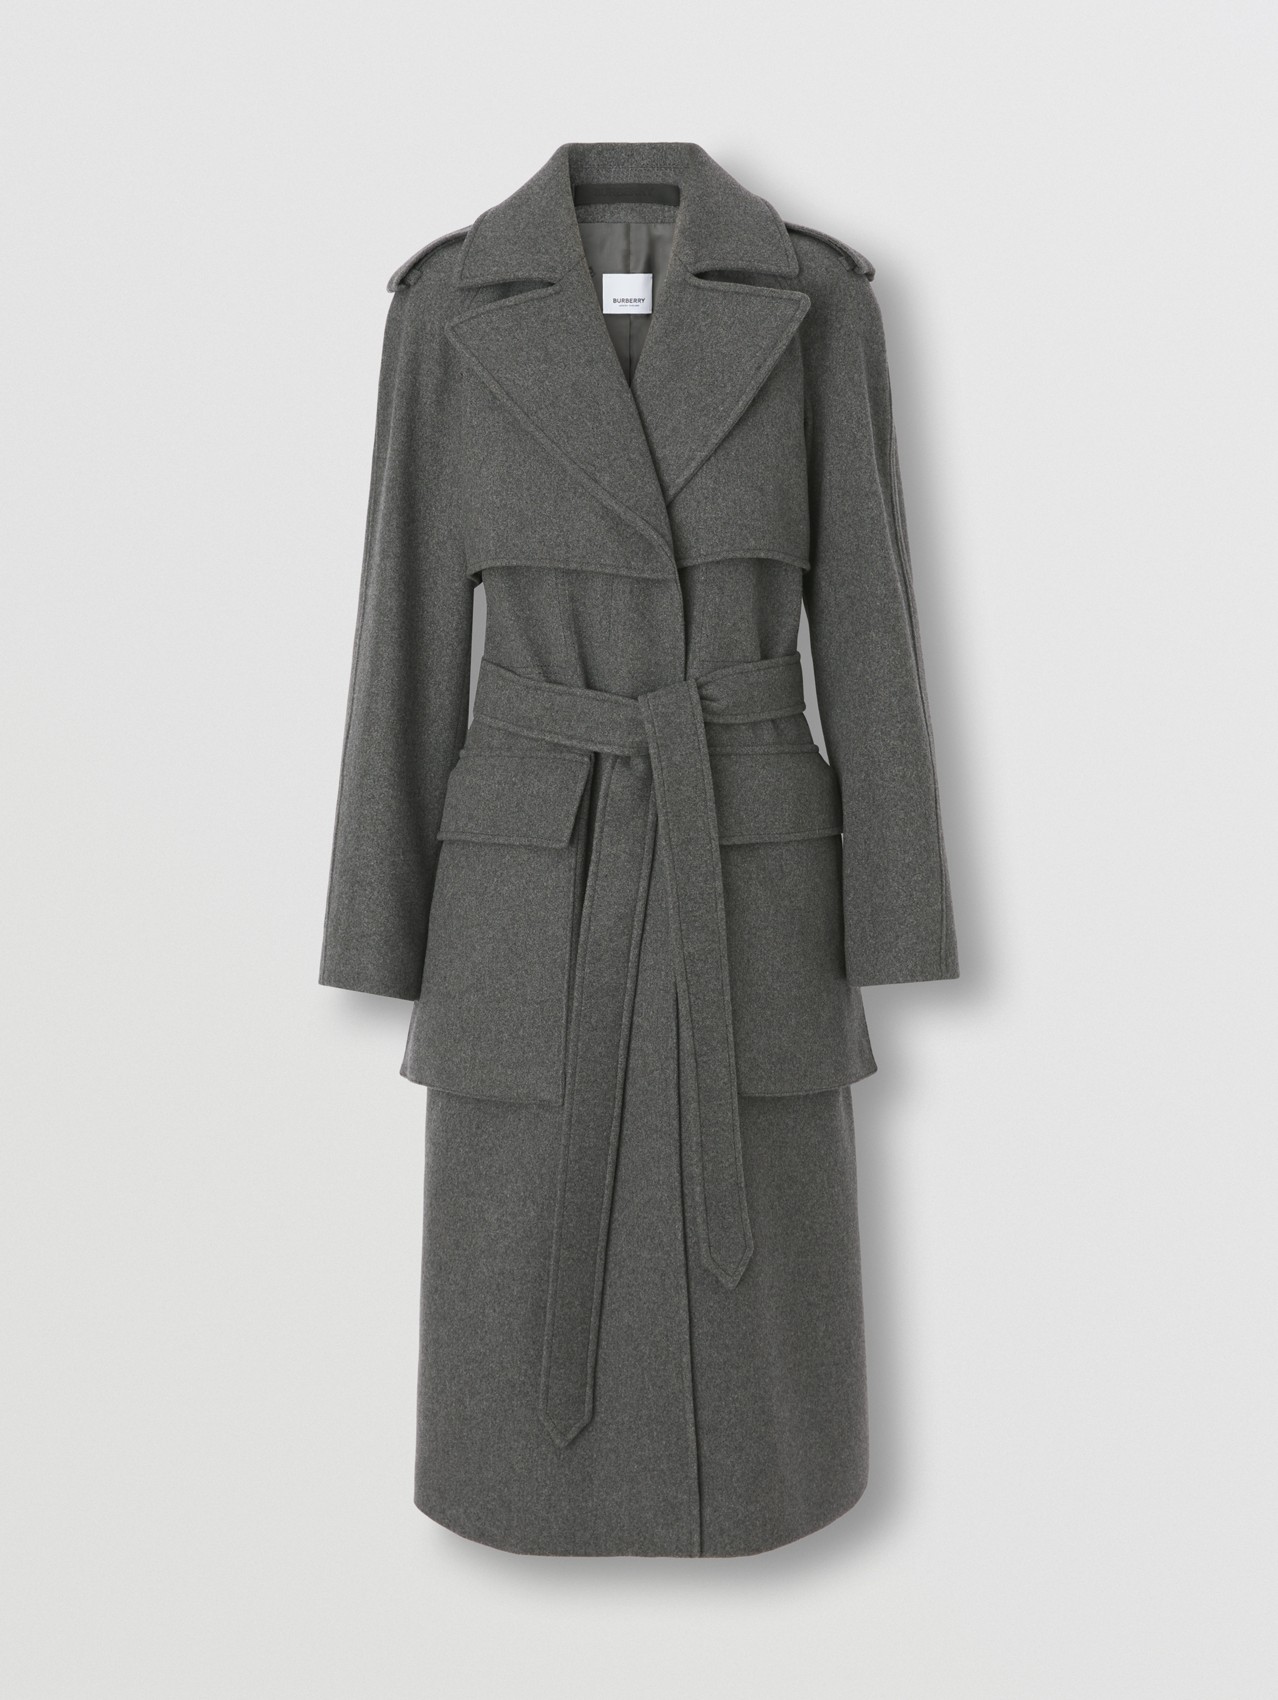 Pocket Detail Recycled Cashmere Trench Coat in Storm Grey Melange